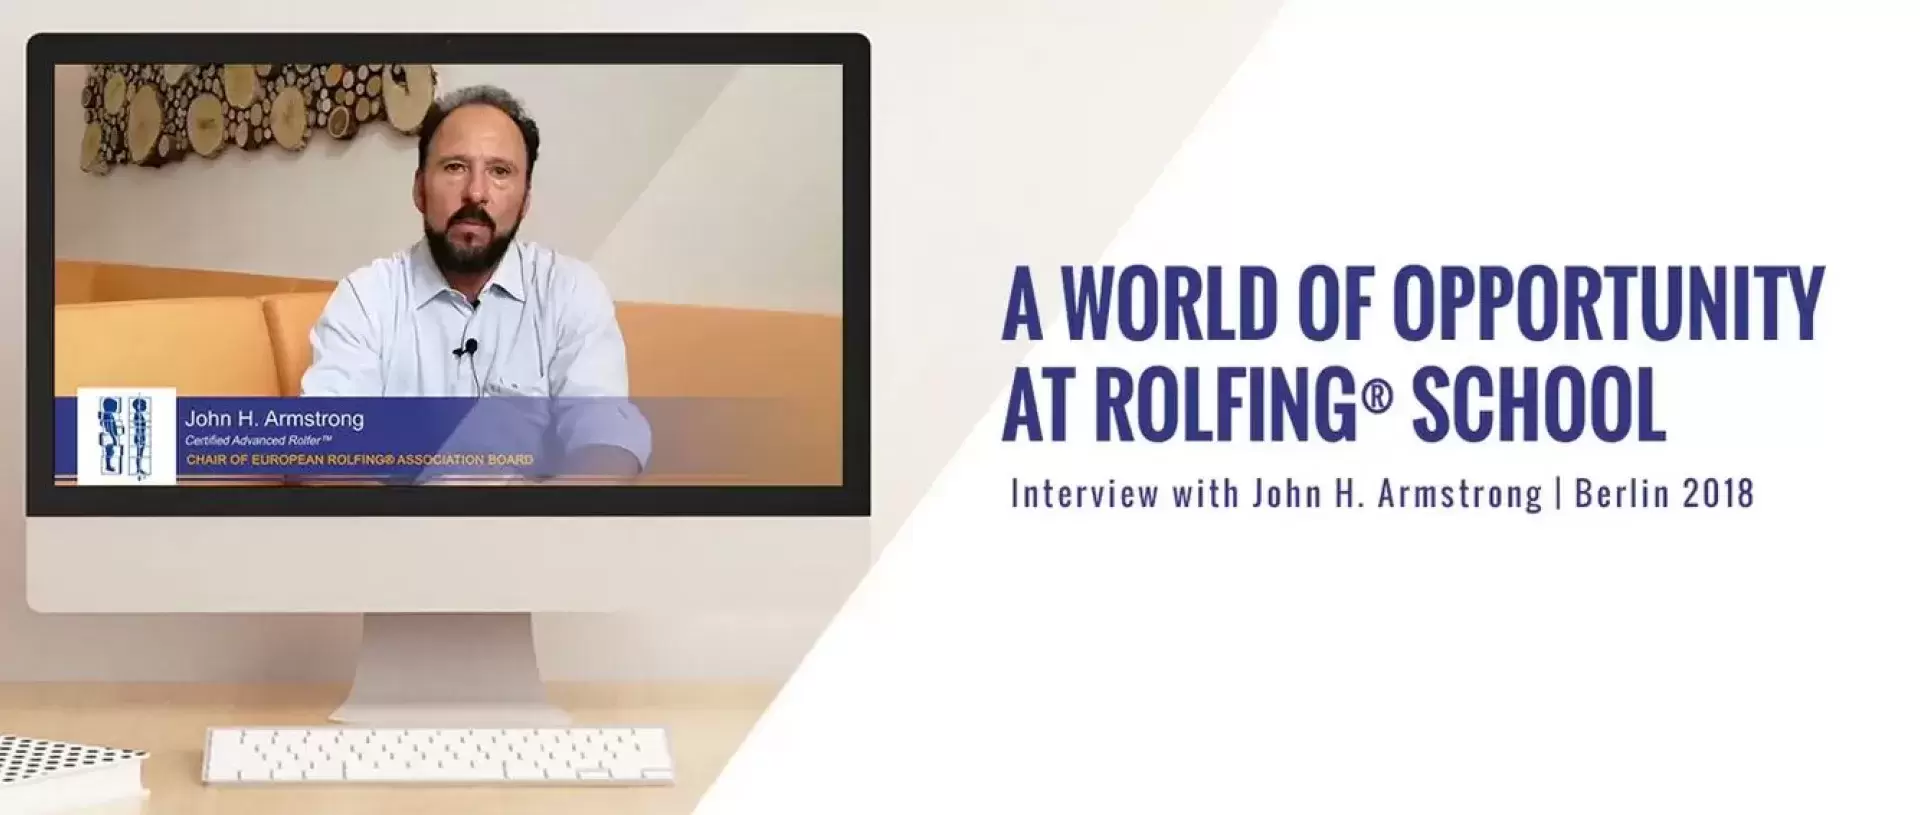 A World of Opportunity at Rolfing® School